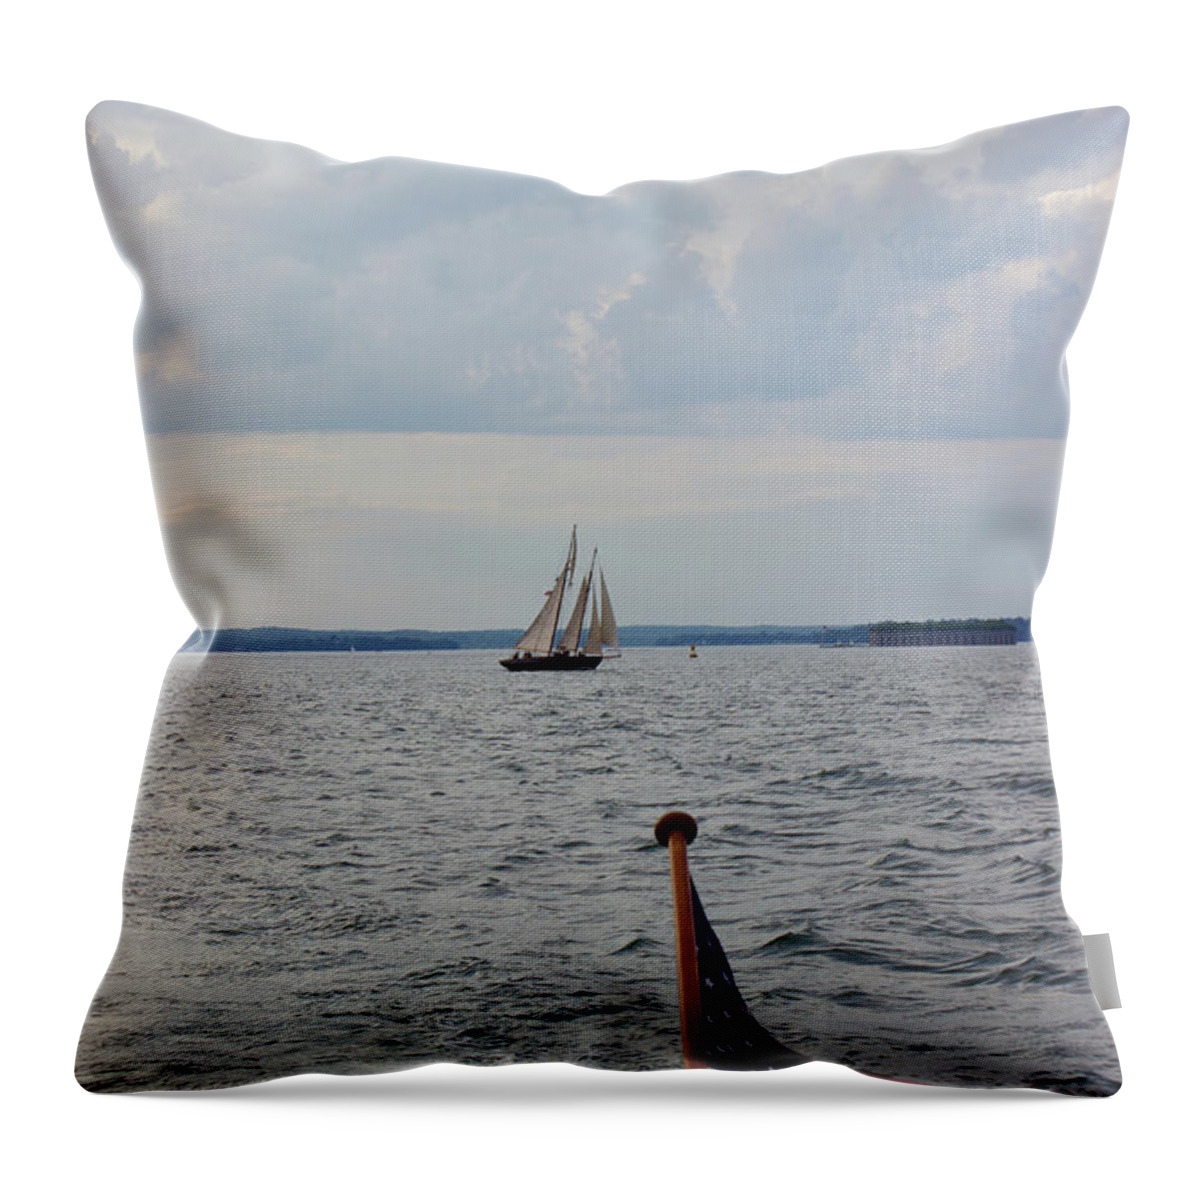  Throw Pillow featuring the photograph Portland Schooner by Annamaria Frost